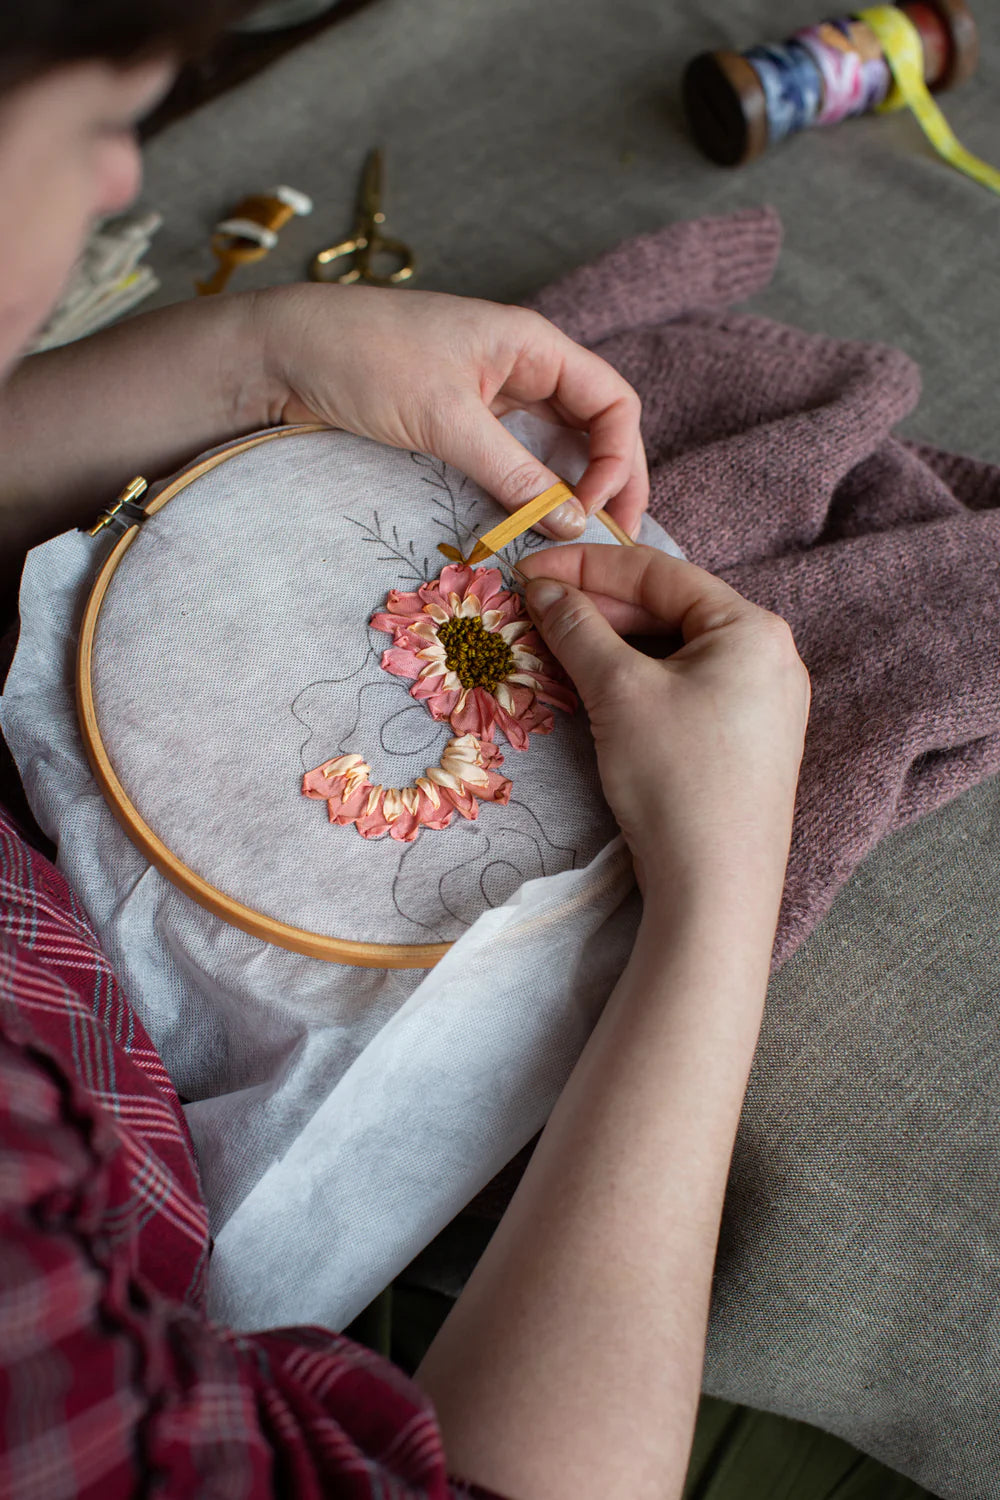 Embroidery on knits - Judith Gummlich